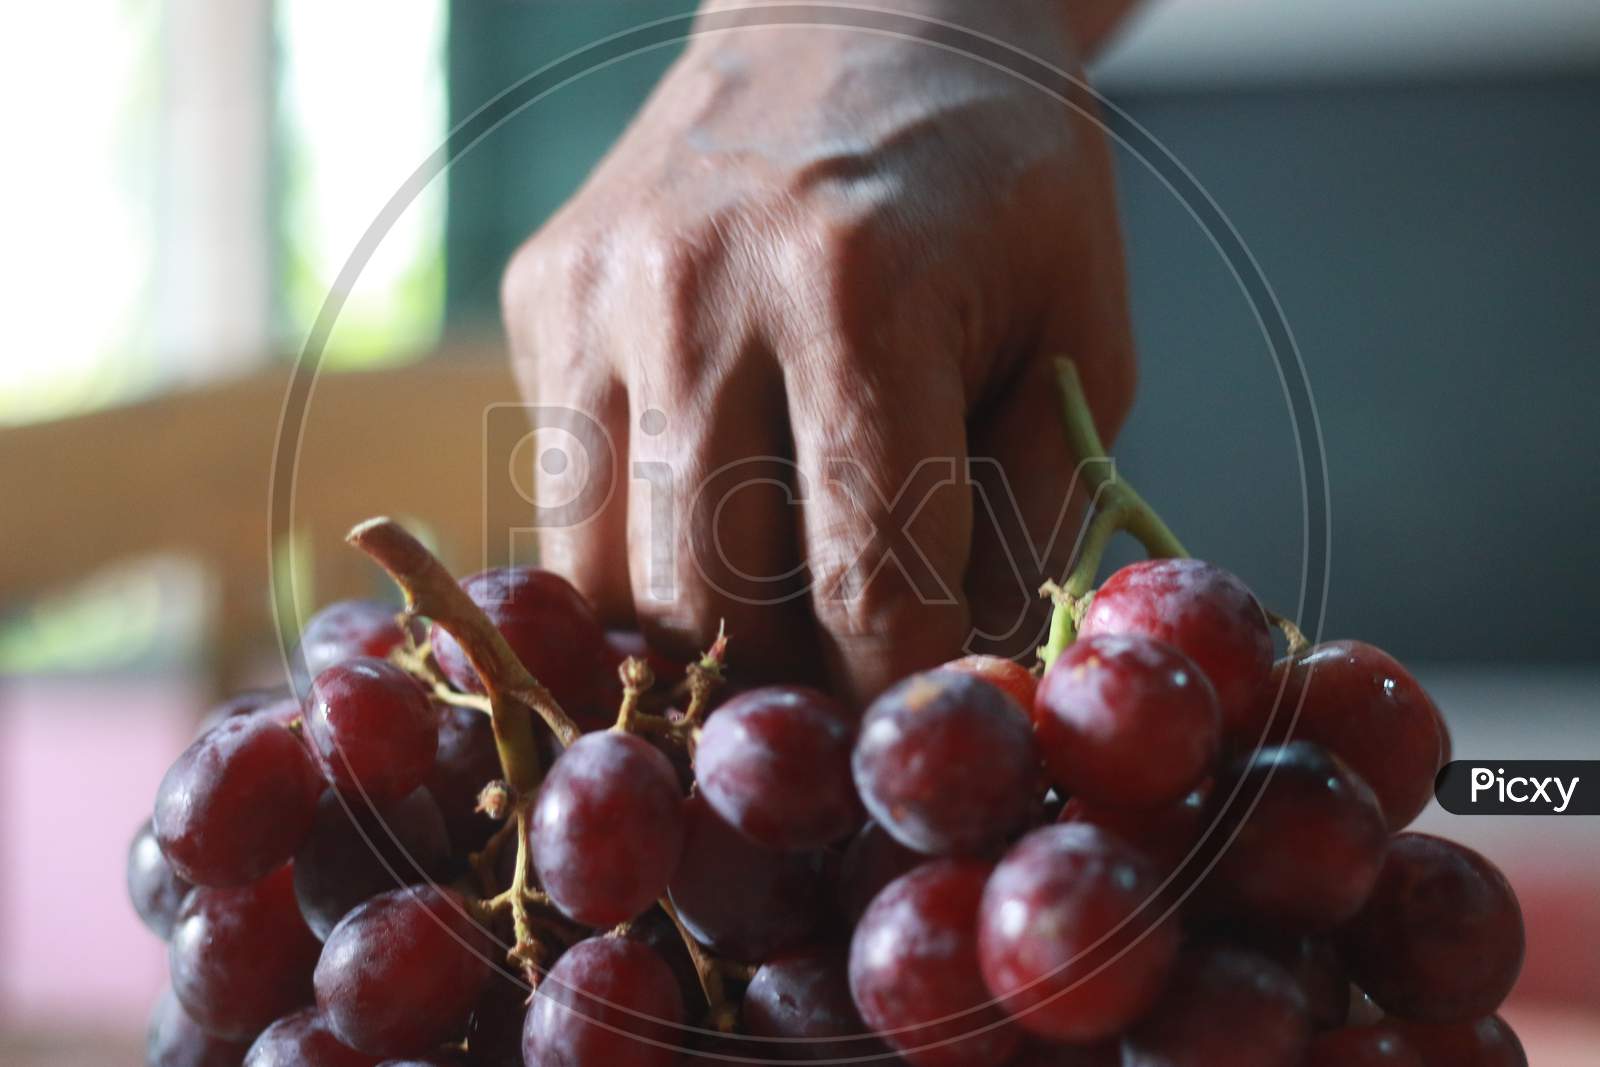 Healthy Fruits Red Wine Grapes Background/ Dark Grapes/ Blue Grapes/Wine Grapes,Red Wine Grapes Background/Dark Grapes,Blue Grapes,Red Grape In A Supermarket Local Market Bunch Of Grapes Ready To Eat